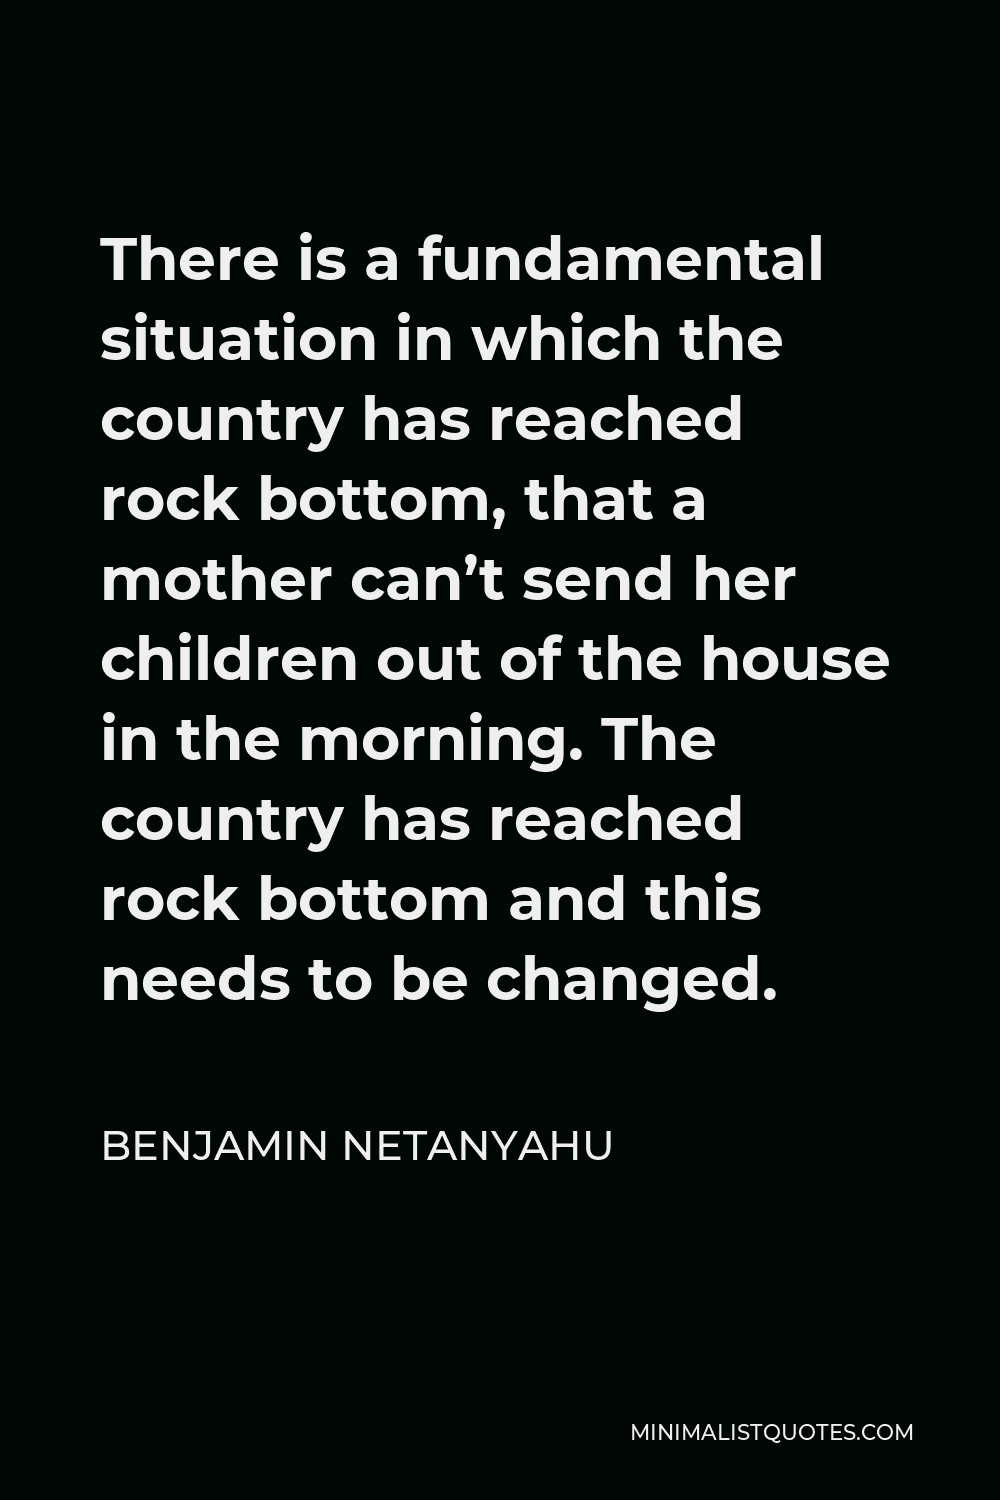 Benjamin Netanyahu Quote - There is a fundamental situation in which the country has reached rock bottom, that a mother can’t send her children out of the house in the morning. The country has reached rock bottom and this needs to be changed.